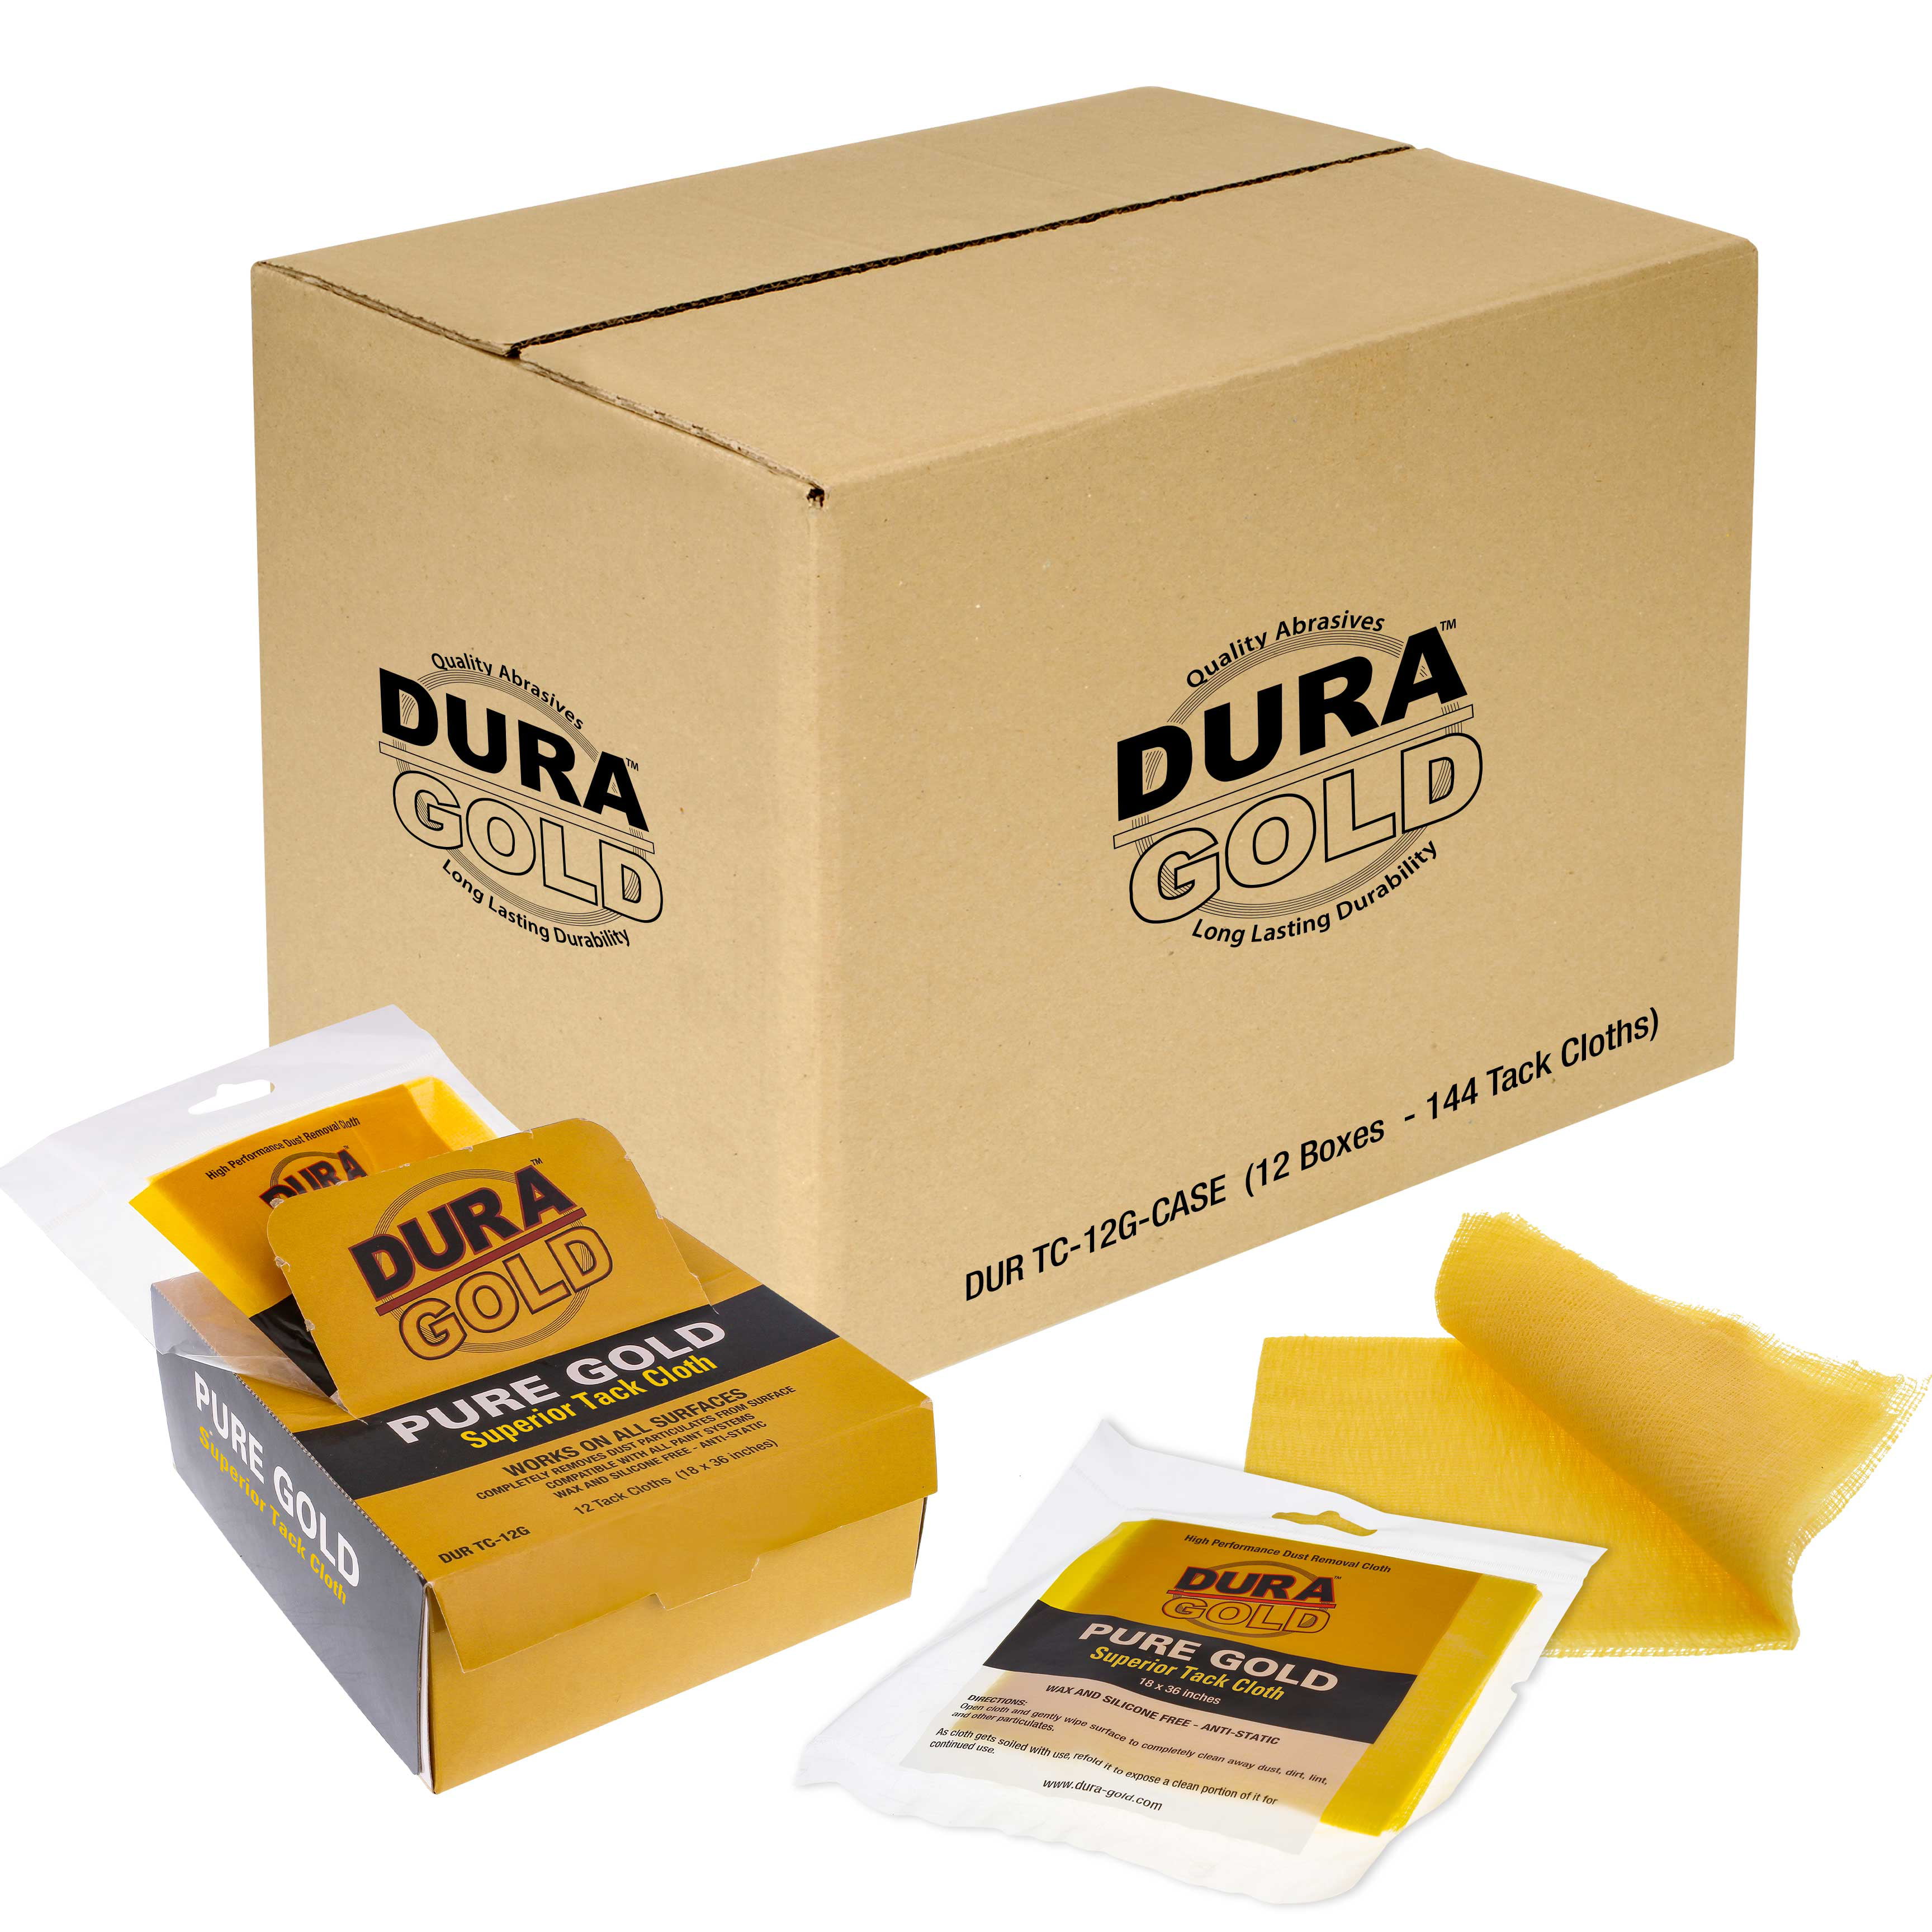 Dura-Gold Pure Gold Superior Tack Cloths - Wax & Silicone Free, Anti Static  - Case of 144 